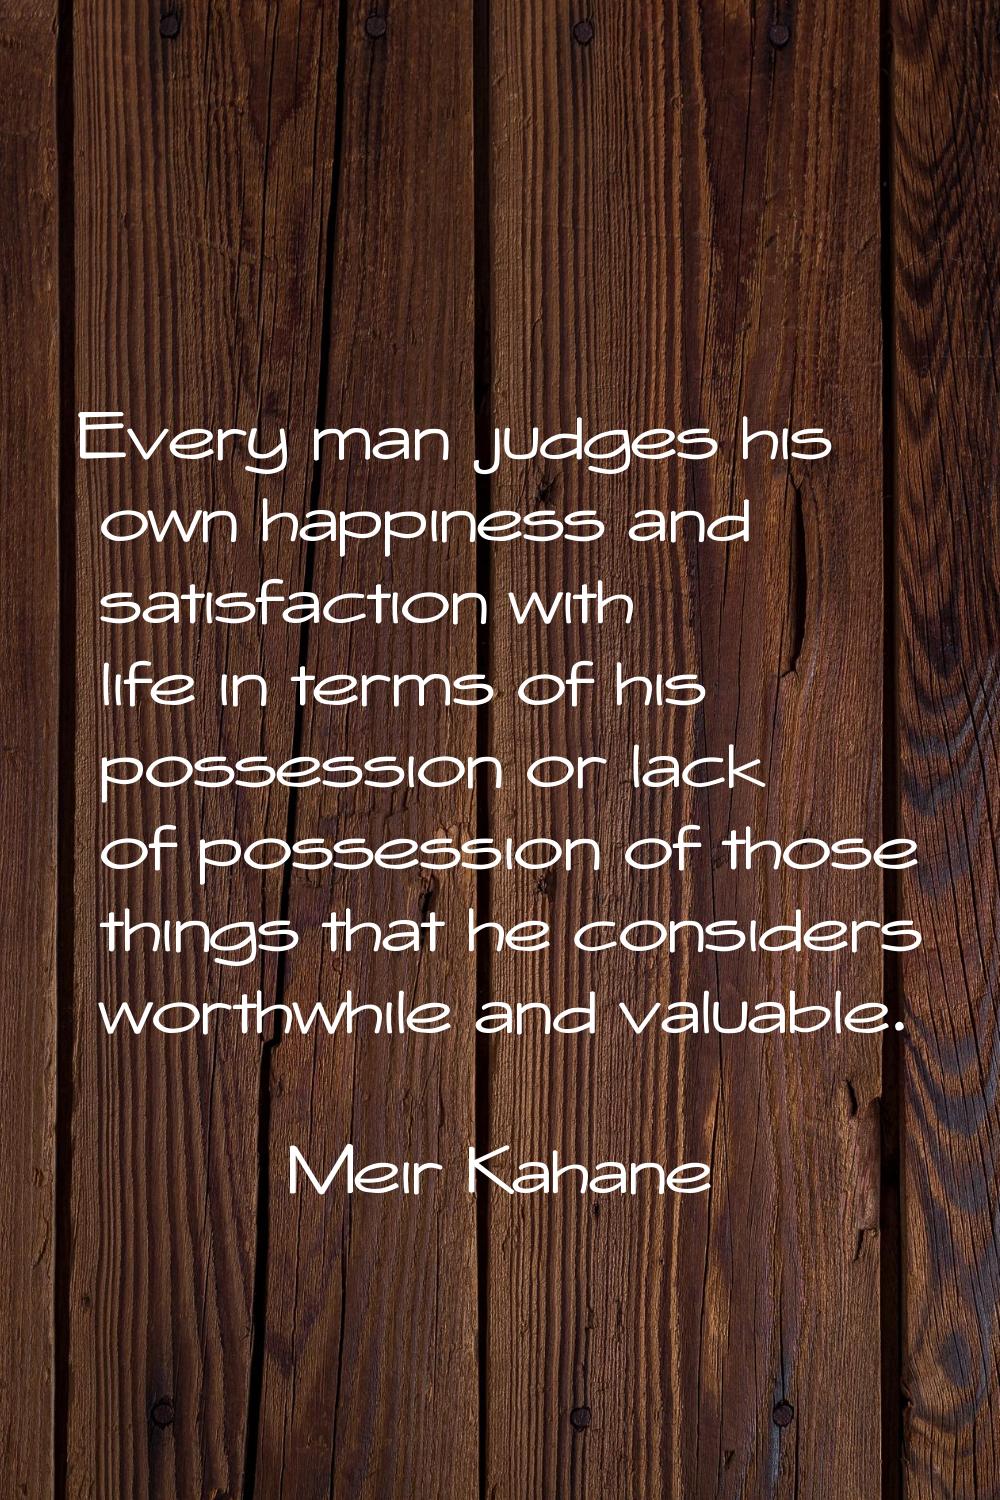 Every man judges his own happiness and satisfaction with life in terms of his possession or lack of